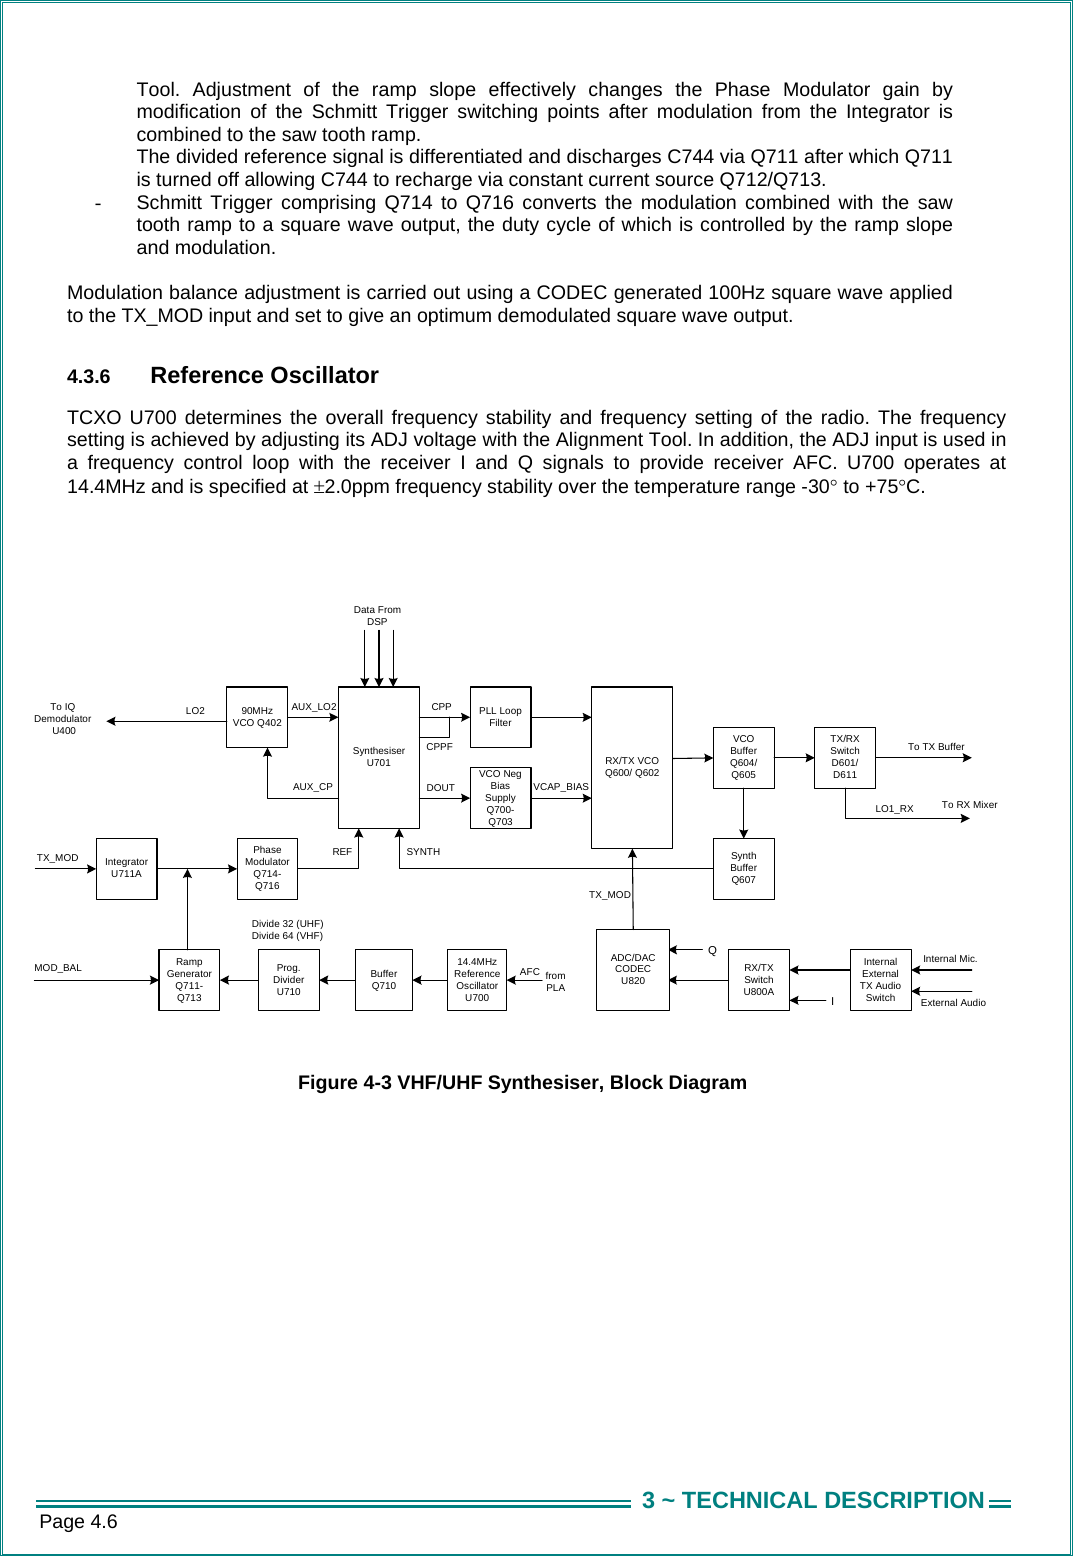 Page 4.6  3 ~ TECHNICAL DESCRIPTIONTool. Adjustment of the ramp slope effectively changes the Phase Modulator gain by modification of the Schmitt Trigger switching points after modulation from the Integrator is combined to the saw tooth ramp. The divided reference signal is differentiated and discharges C744 via Q711 after which Q711 is turned off allowing C744 to recharge via constant current source Q712/Q713. -  Schmitt Trigger comprising Q714 to Q716 converts the modulation combined with the saw tooth ramp to a square wave output, the duty cycle of which is controlled by the ramp slope and modulation.  Modulation balance adjustment is carried out using a CODEC generated 100Hz square wave applied to the TX_MOD input and set to give an optimum demodulated square wave output.   4.3.6  Reference Oscillator TCXO U700 determines the overall frequency stability and frequency setting of the radio. The frequency setting is achieved by adjusting its ADJ voltage with the Alignment Tool. In addition, the ADJ input is used in a frequency control loop with the receiver I and Q signals to provide receiver AFC. U700 operates at 14.4MHz and is specified at ±2.0ppm frequency stability over the temperature range -30° to +75°C.       90MHz VCO Q402SynthesiserU701 RX/TX VCO Q600/ Q602TX/RX Switch D601/D611VCO Buffer Q604/Q605Data From DSPPhase ModulatorQ714-Q716Ramp Generator Q711-Q713IntegratorU711ATX_MODMOD_BAL Prog. Divider U710 Buffer Q71014.4MHzReference Oscillator U700To TX BufferREFPLL Loop FilterVCO Neg Bias Supply Q700-Q703CPPCPPFDOUT VCAP_BIASAUX_LO2AUX_CPDivide 32 (UHF)Divide 64 (VHF)Synth Buffer Q607SYNTHLO1_RXQRX/TX Switch U800A IInternal External TX Audio SwitchInternal Mic.External AudioADC/DACCODECU820TX_MODTo IQ Demodulator U400LO2AFC  from PLATo RX Mixer  Figure 4-3 VHF/UHF Synthesiser, Block Diagram          